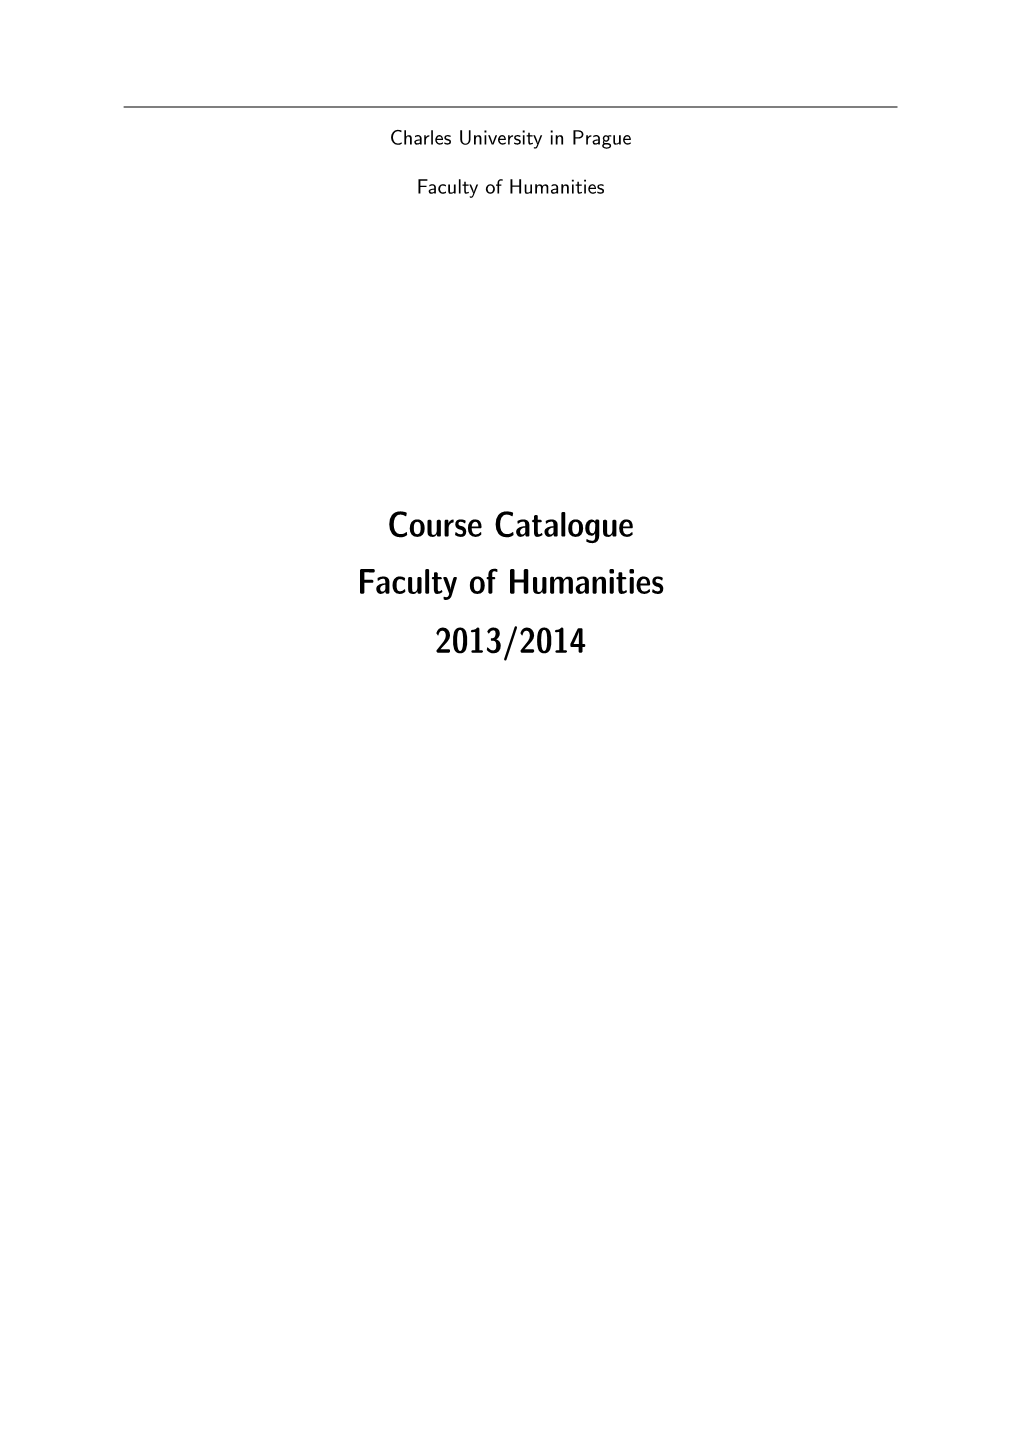 Course Catalogue Faculty of Humanities 2013/2014 Editorial Closing Date: June